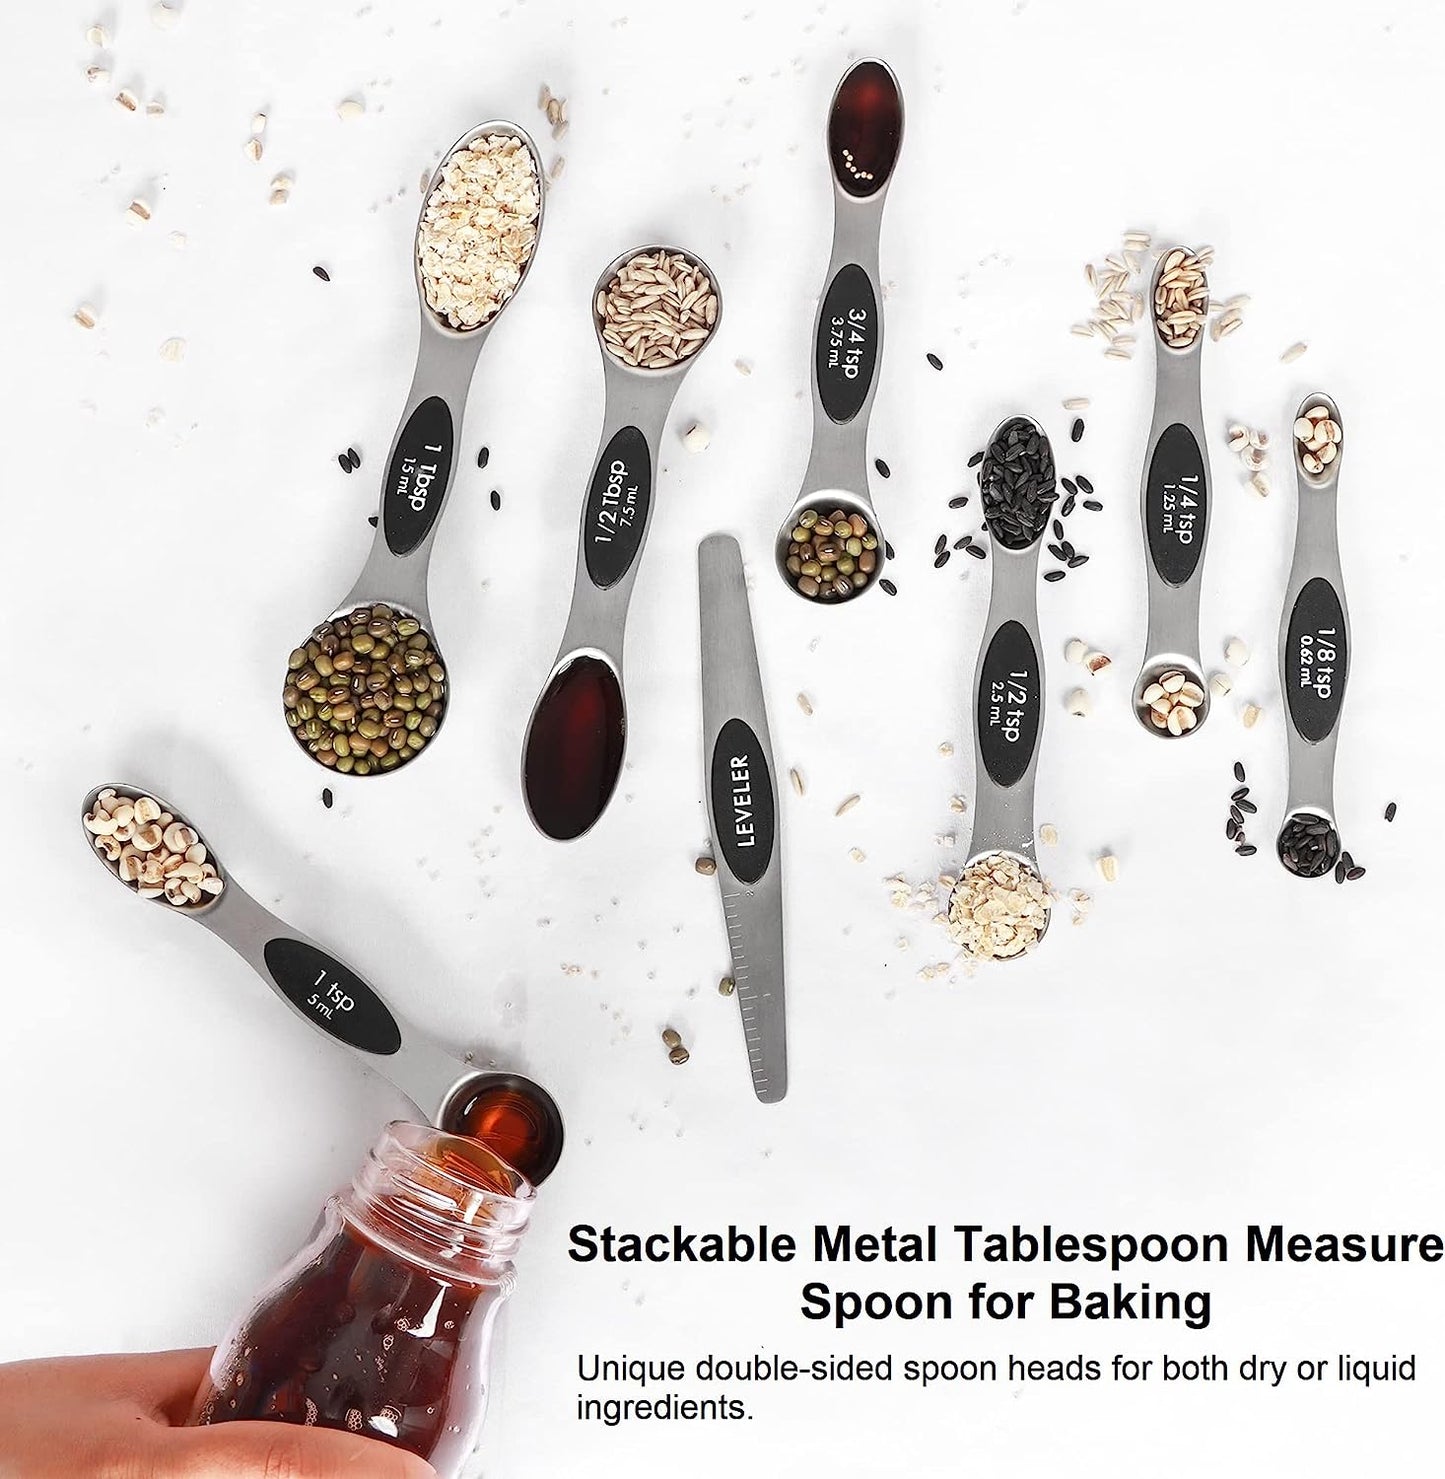 Magnetic Measuring Spoons Set Stainless Steel with Leveler-9pcs Stackable